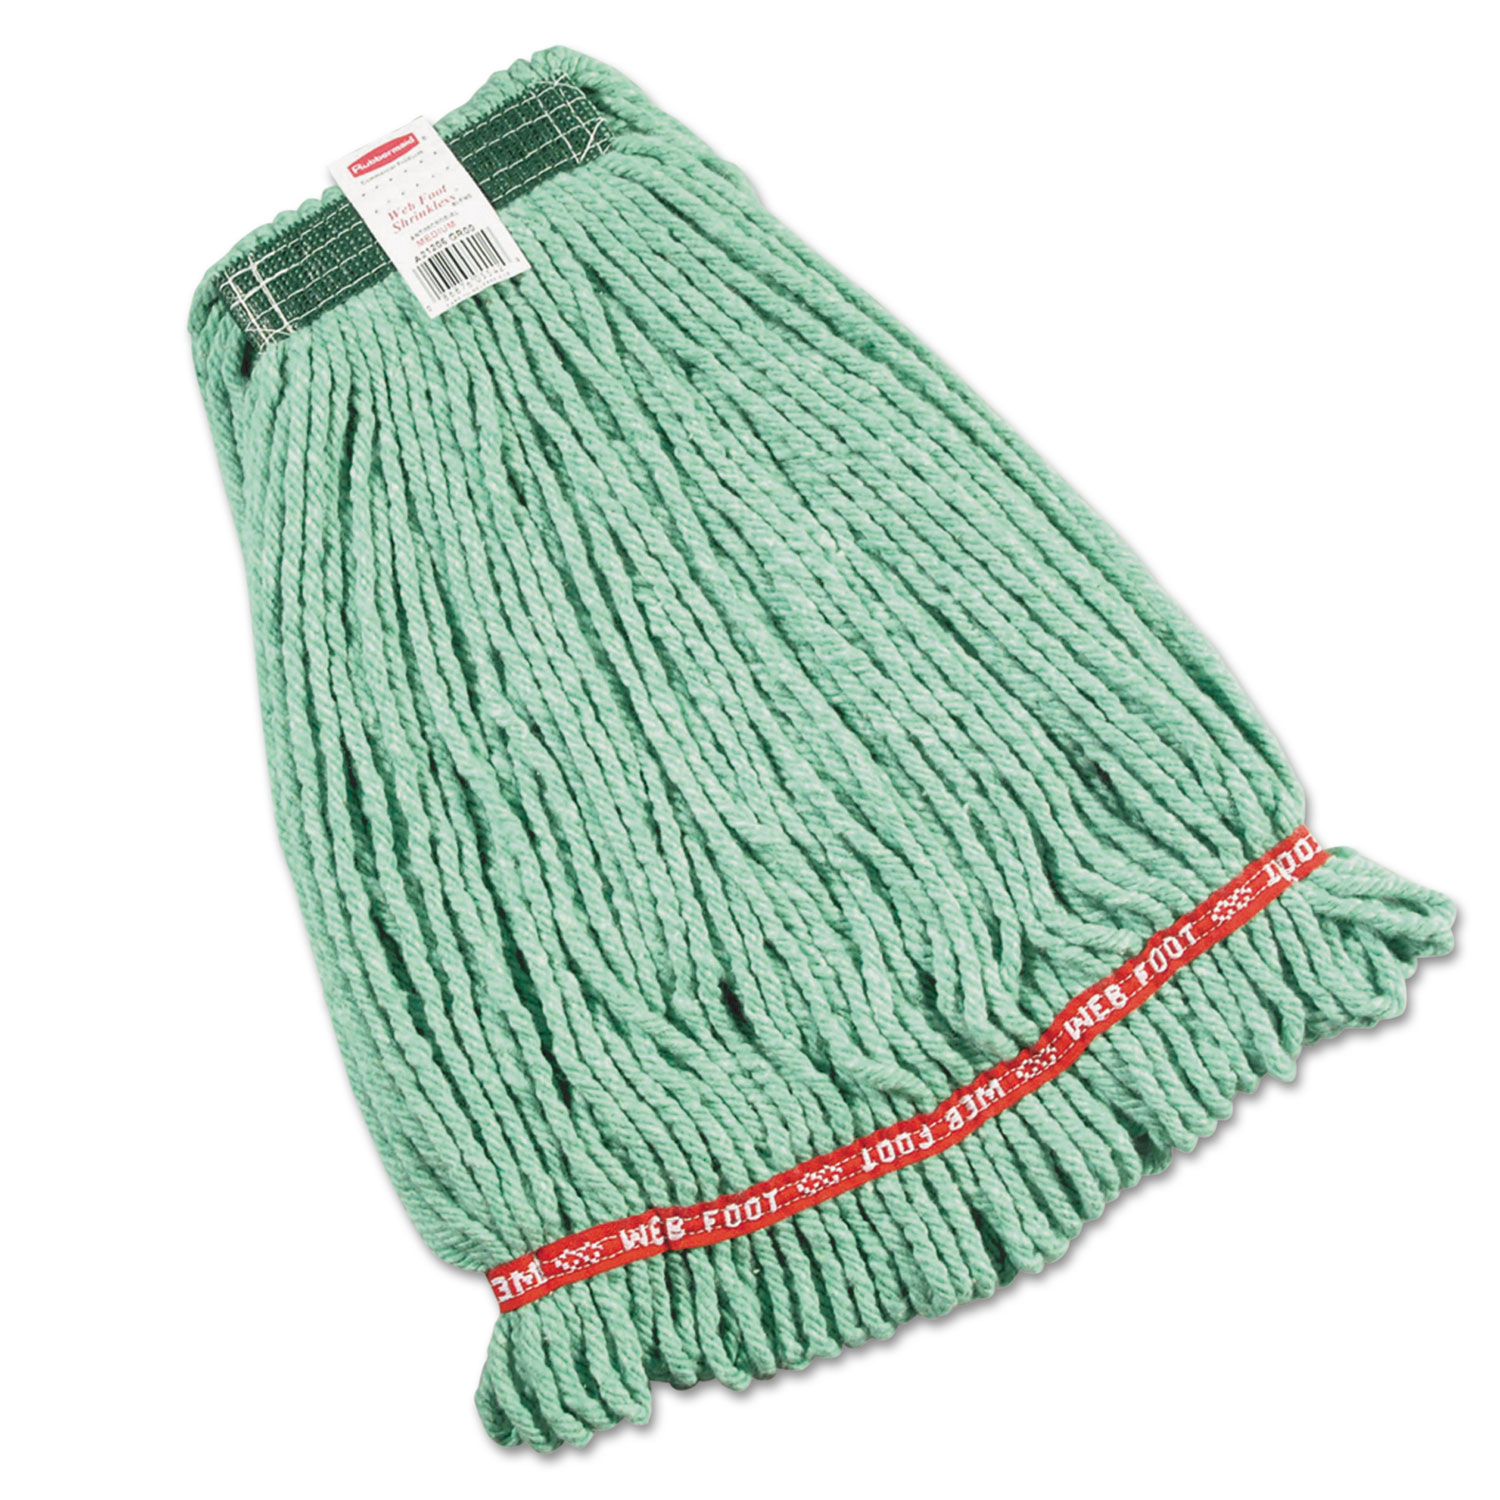  Rubbermaid Commercial FGA21206GR00 Web Foot Wet Mop Heads, Shrinkless, Cotton/Synthetic, Green, Medium (RCPA212GRE) 